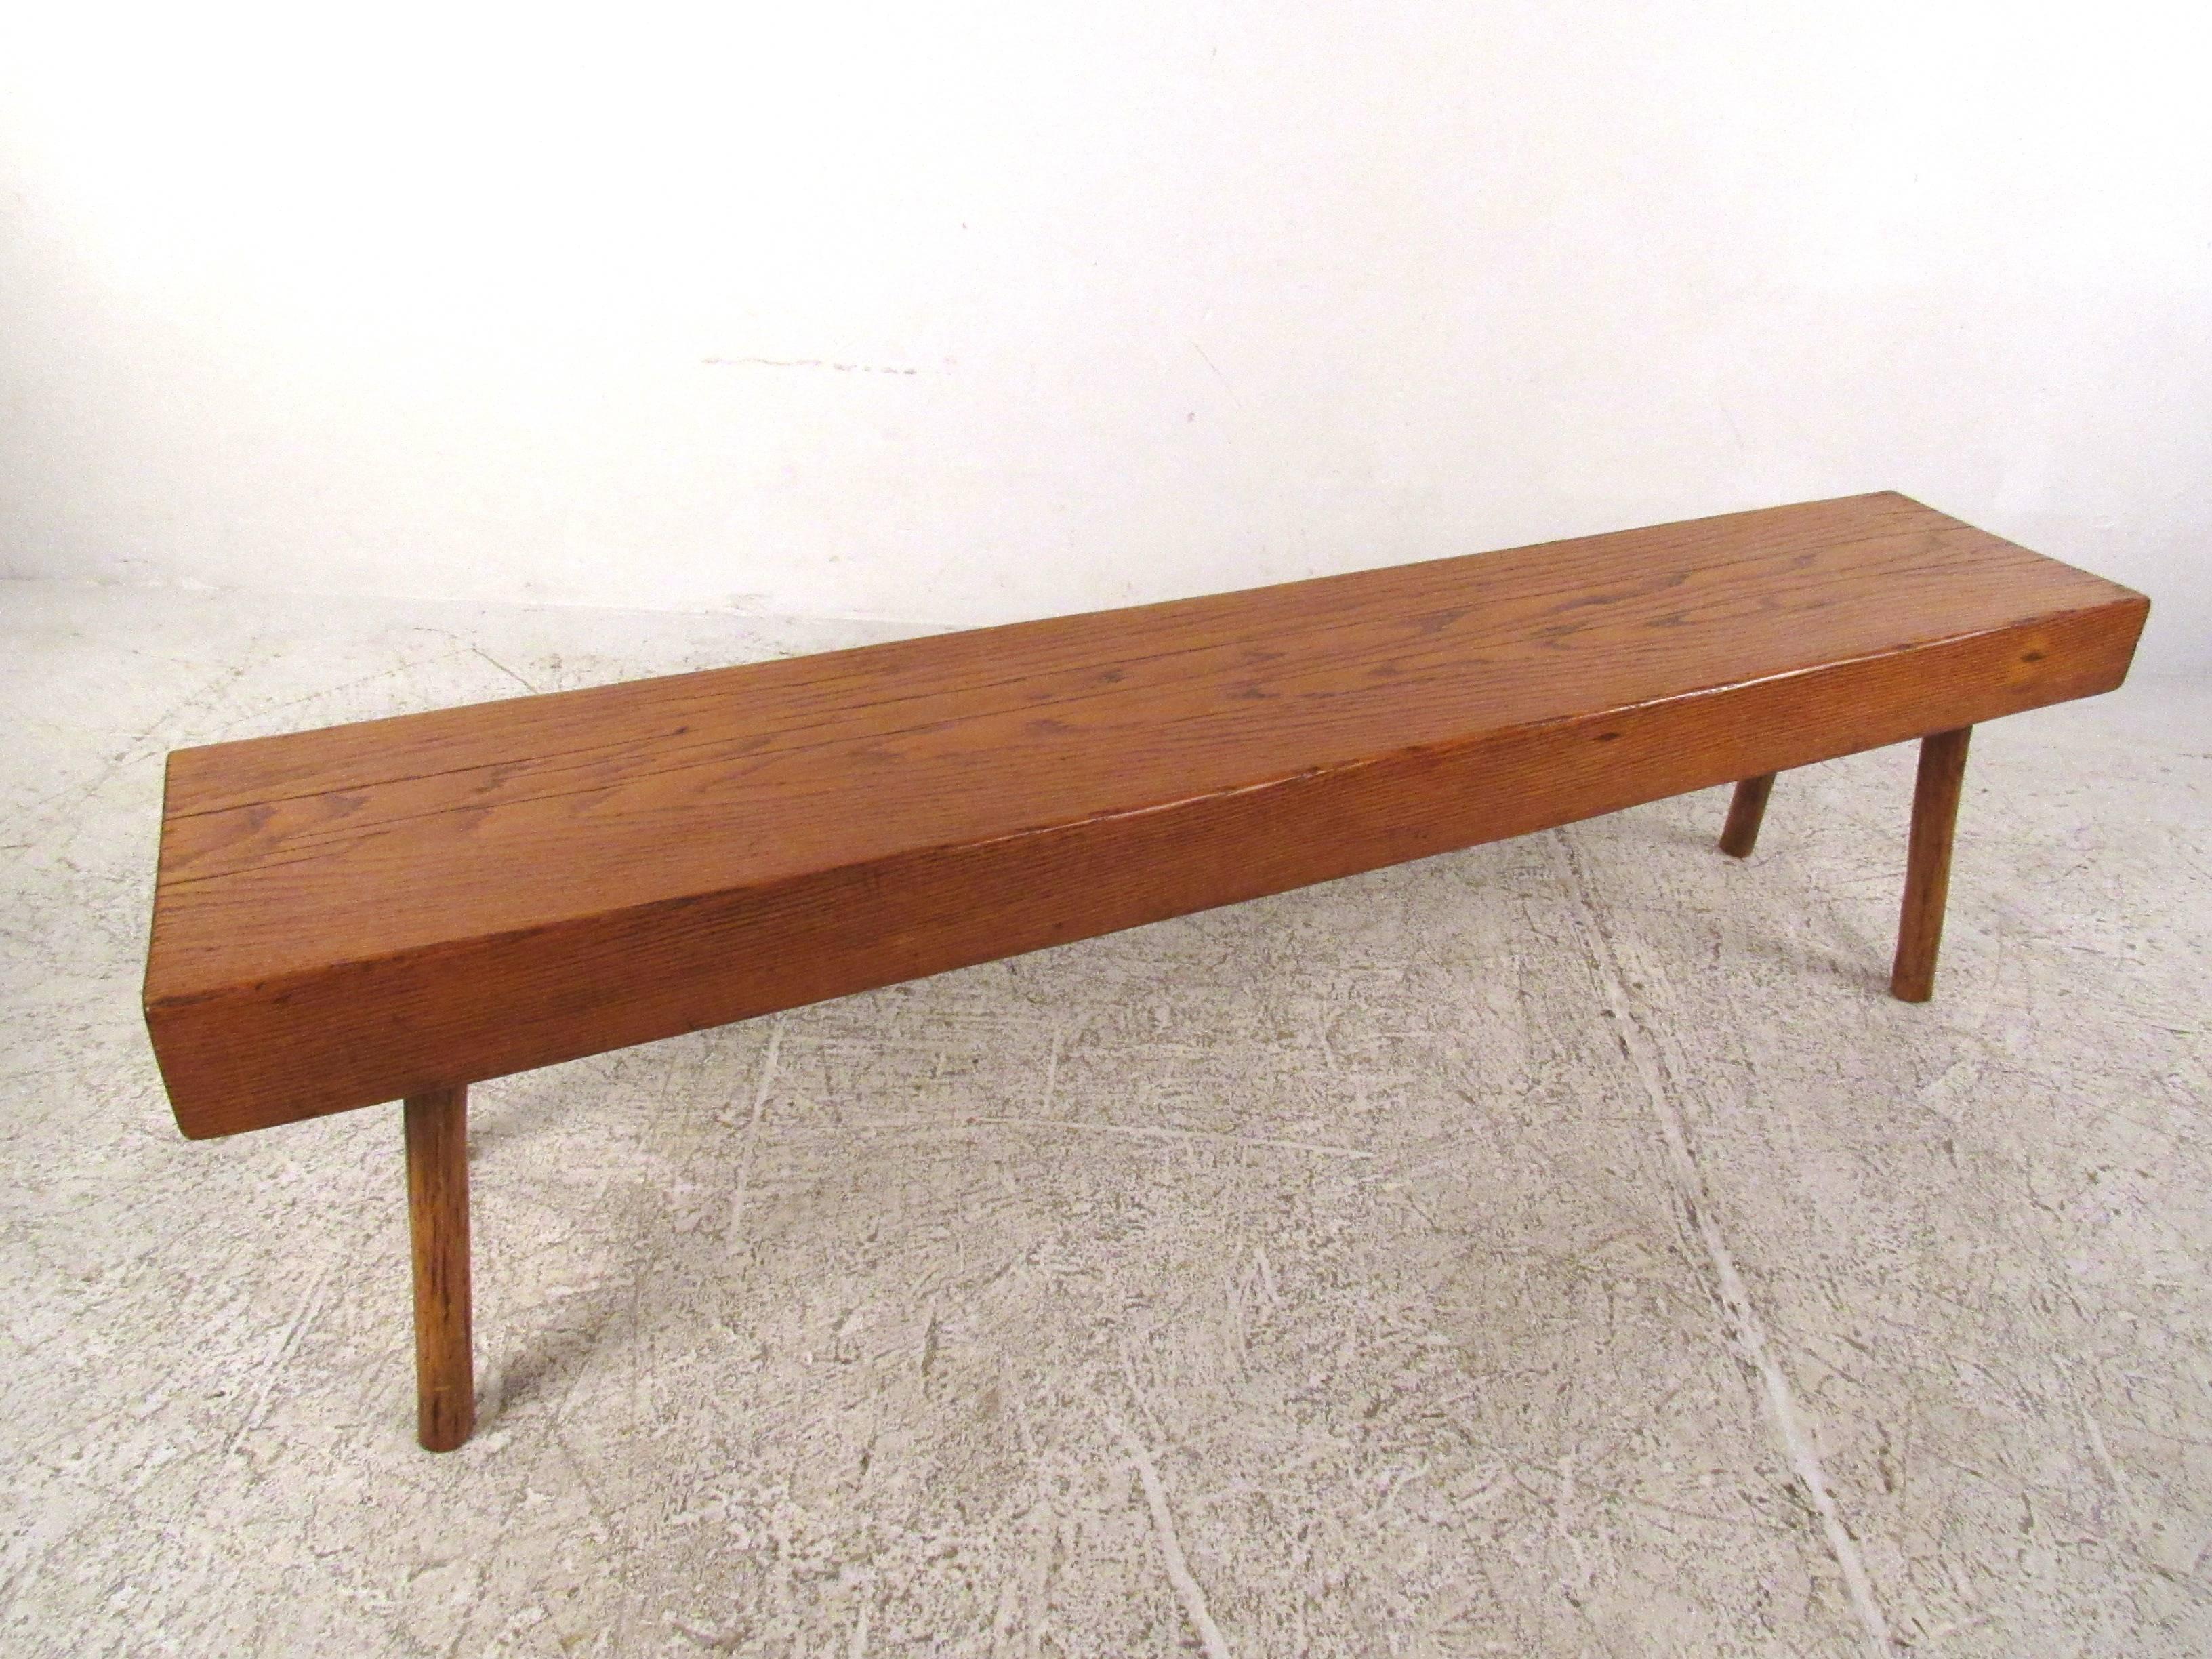 This solid oak studio made bench features quality Mid-Century construction and a versatile rustic design. Simple hand-cut oak on spindle style legs, this was a one of kind production from 1960 and makes the perfect piece for occasional seating in